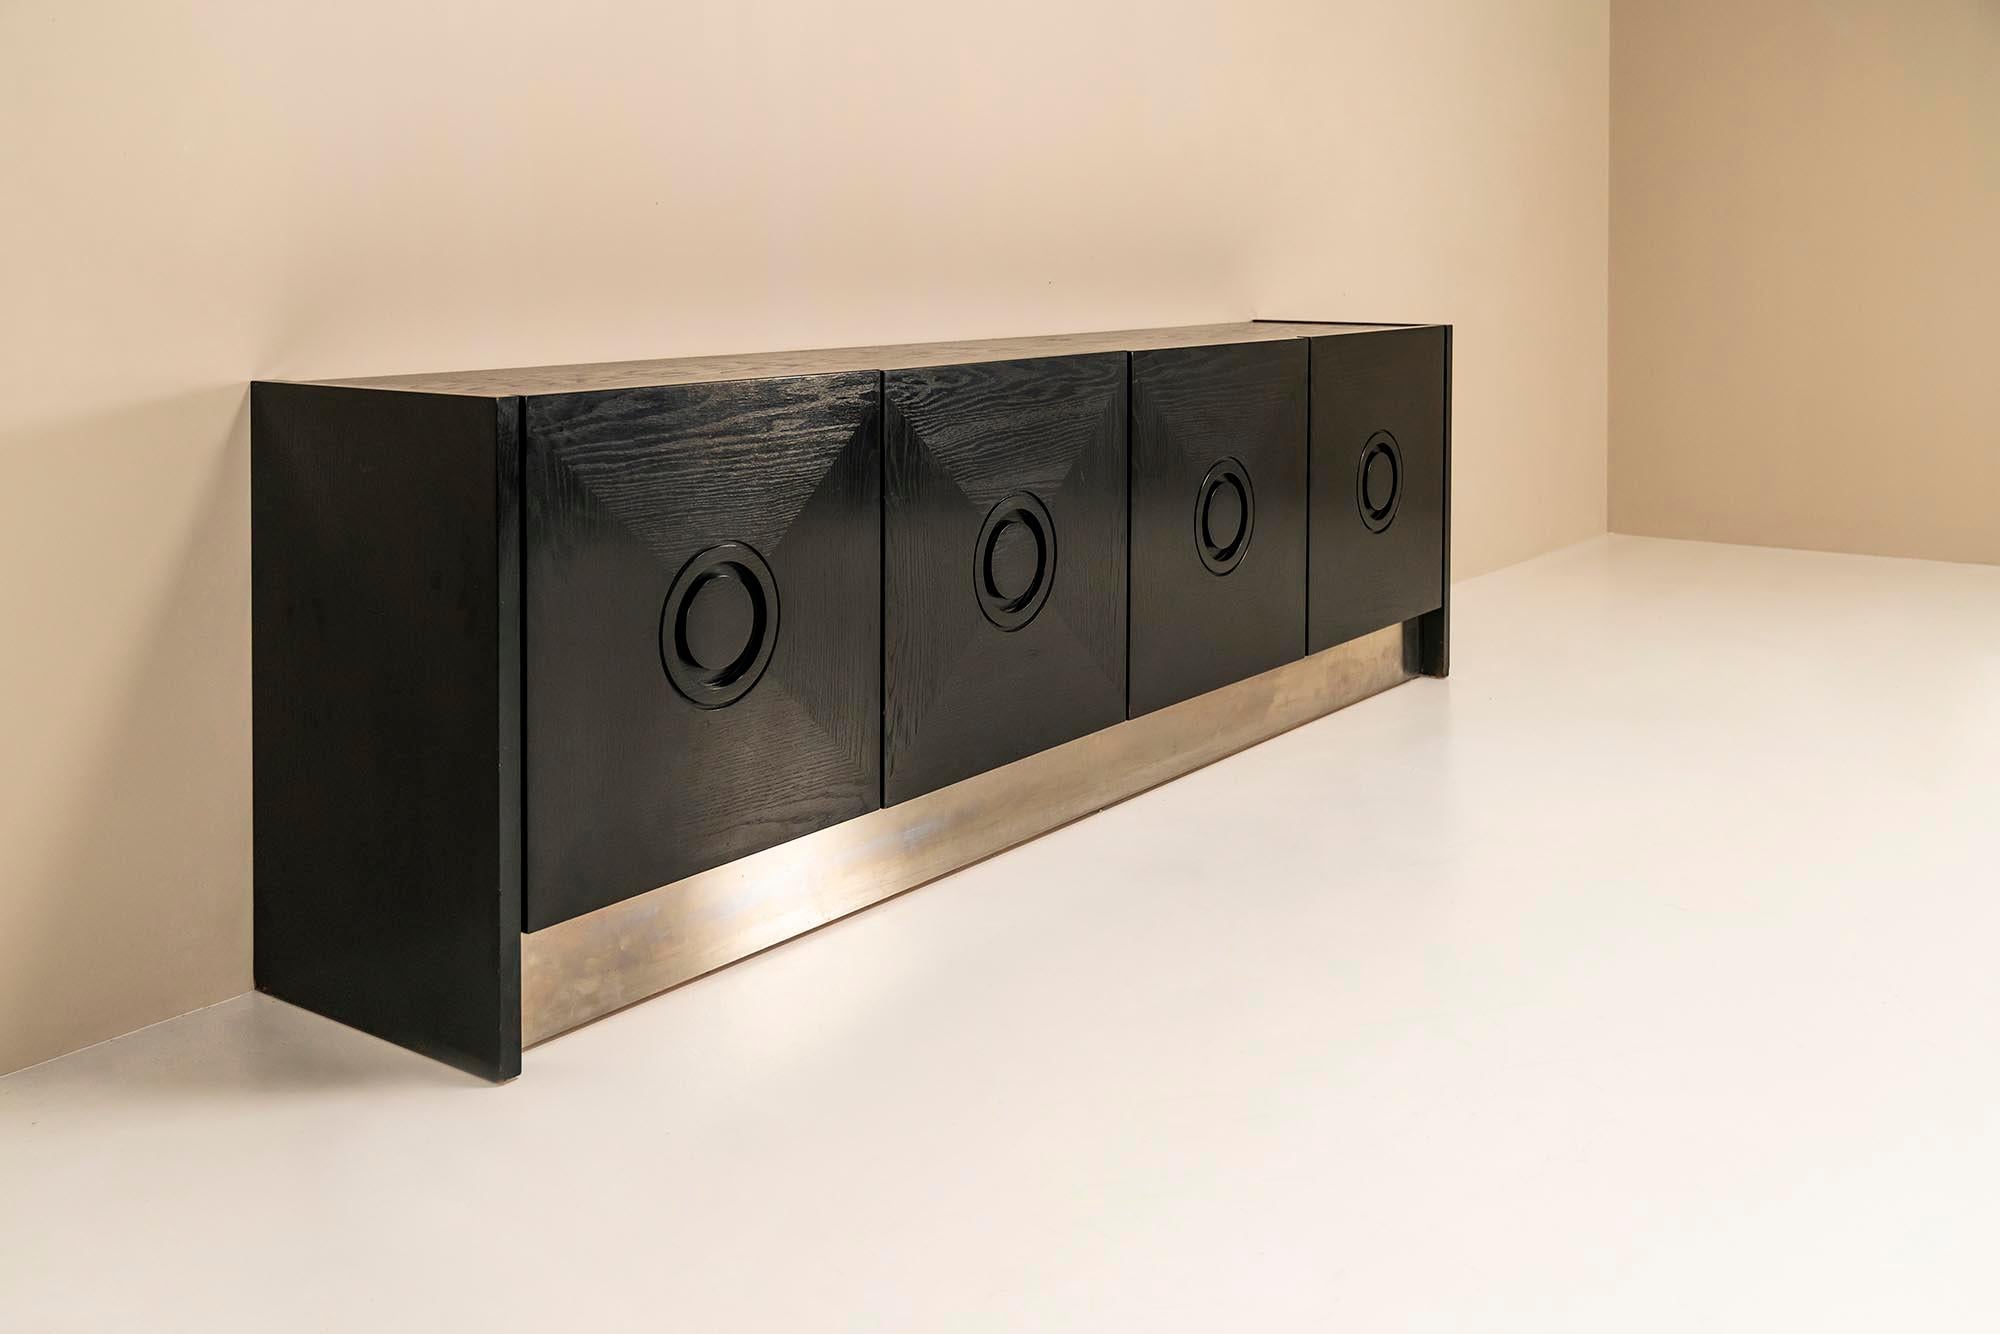 Mid-Century Modern Brutalist Sideboard In Black Stained Oak And Brushed Steel, Belgium 1970s. For Sale